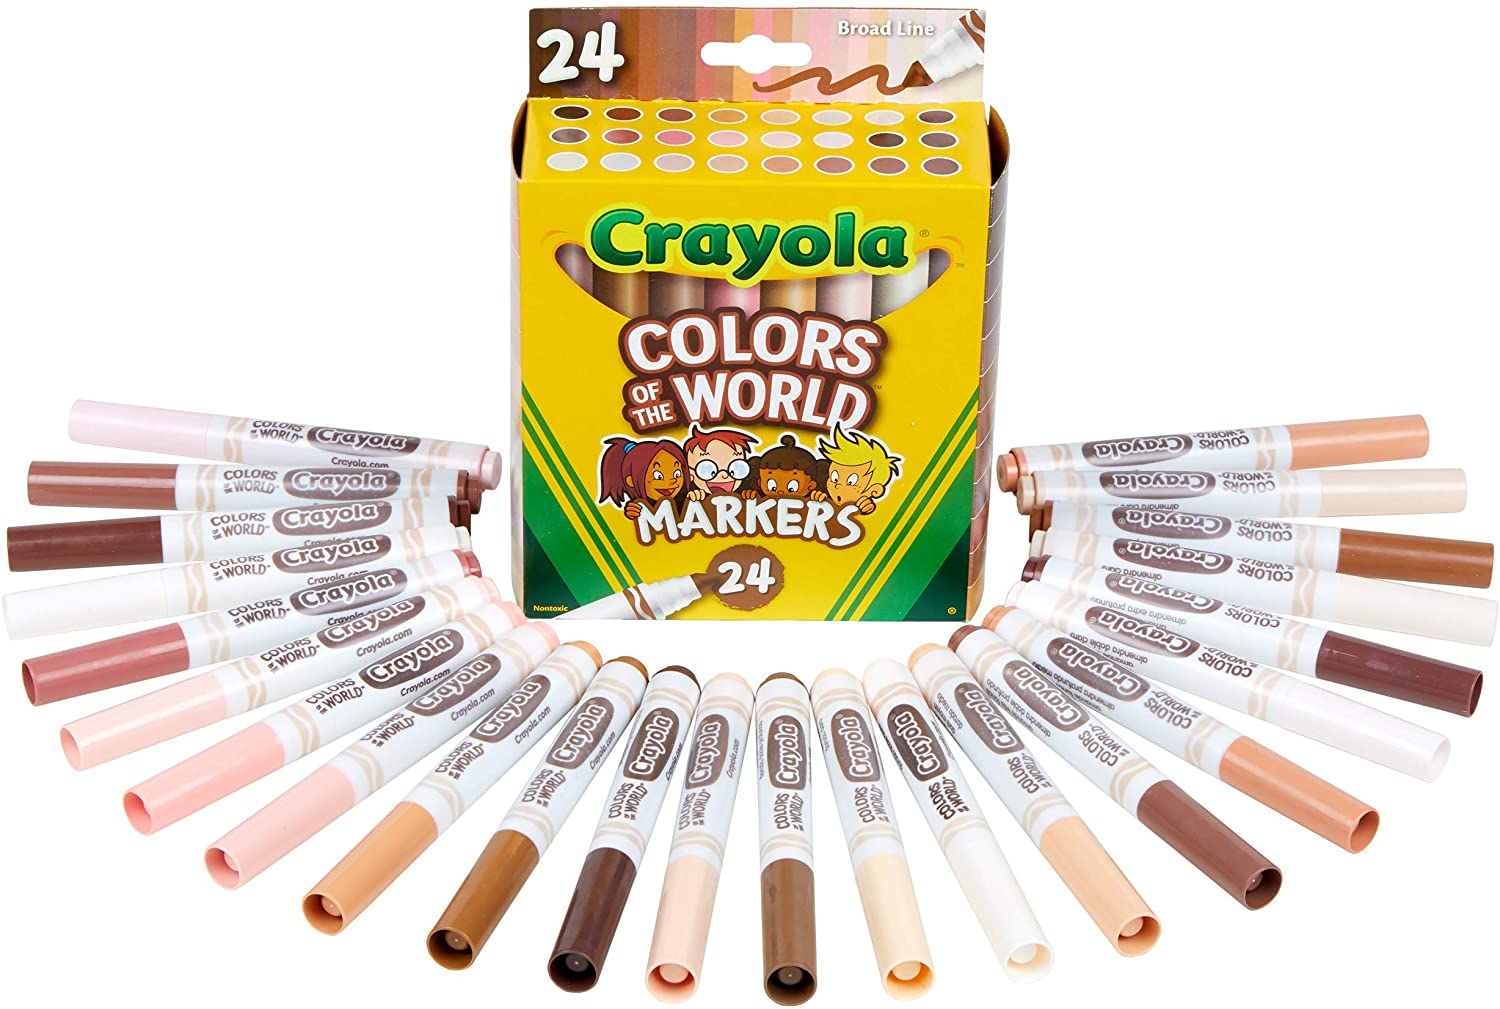 Crayola’s Colors Of The World Collection Now Includes Colored Pencils